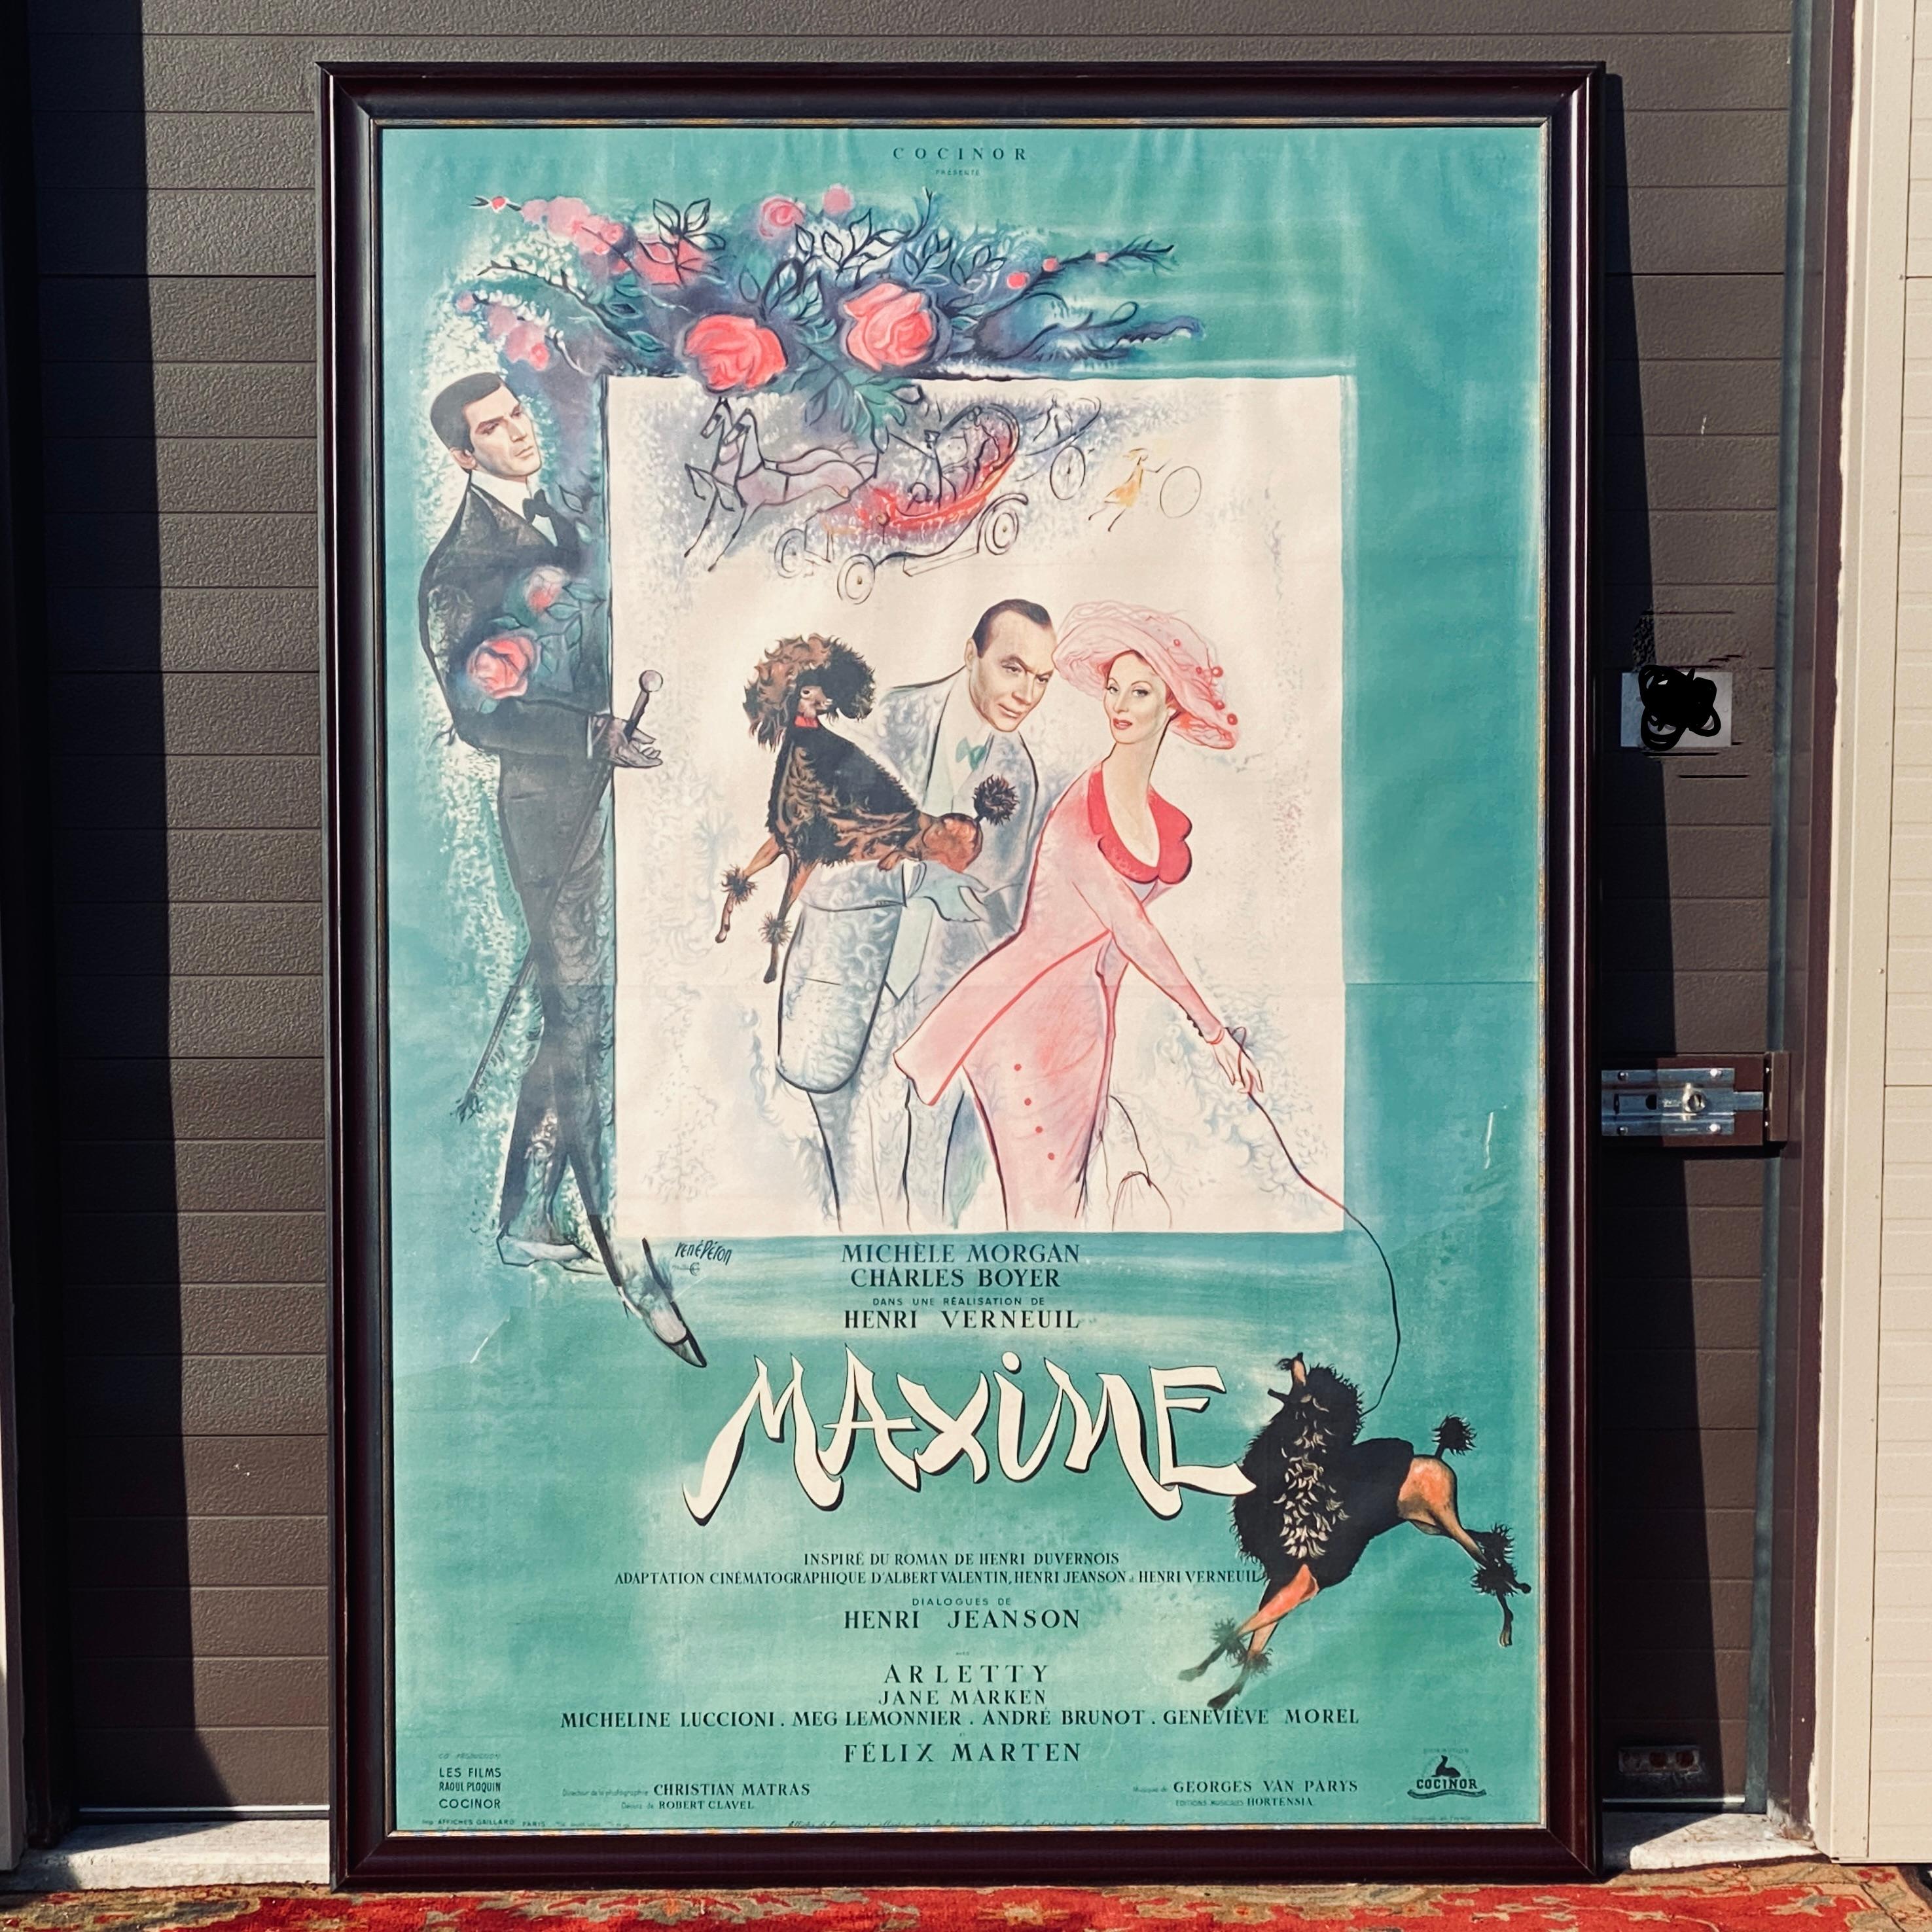 Original 1958 French movie poster by Rene Peron for the film Maxime directed by Henri Verneuil strarring Michèle Morgan and Charles Boyer. Large scale statement piece adds a nice pop of color with a vibrant scene featuring the poodle dog and actors.